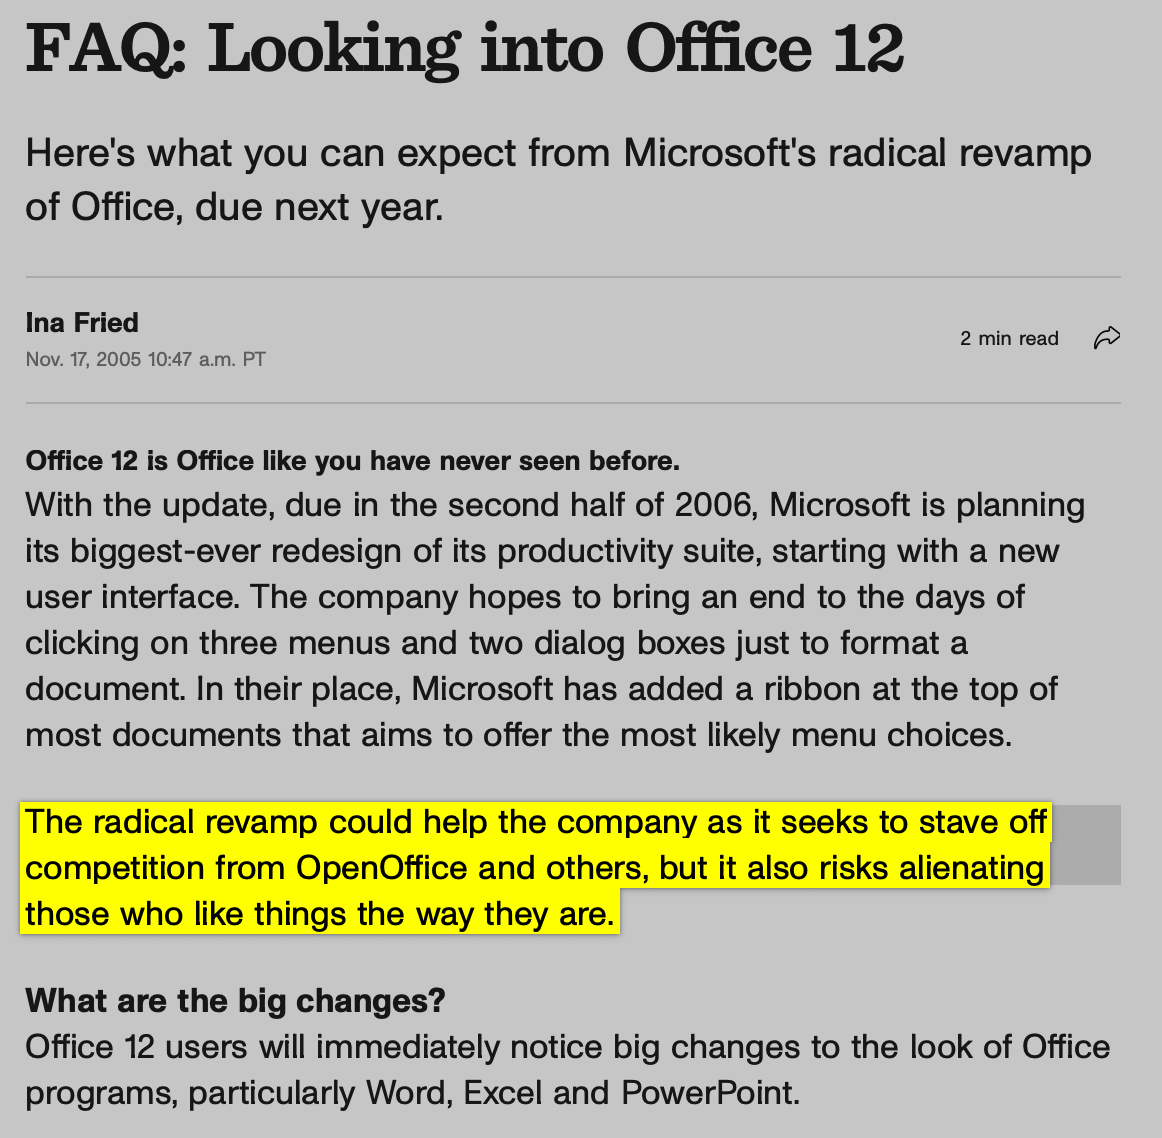 FAQ: Looking into Office 12  Here's what you can expect from Microsoft's radical revamp of Office, due next year.  Ina Fried Nov. 17, 2005 10:47 a.m. PT 2 min read Office 12 is Office like you have never seen before. With the update, due in the second half of 2006, Microsoft is planning its biggest-ever redesign of its productivity suite, starting with a new user interface. The company hopes to bring an end to the days of clicking on three menus and two dialog boxes just to format a document. In their place, Microsoft has added a ribbon at the top of most documents that aims to offer the most likely menu choices.  The radical revamp could help the company as it seeks to stave off competition from OpenOffice and others, but it also risks alienating those who like things the way they are.  What are the big changes? Office 12 users will immediately notice big changes to the look of Office programs, particularly Word, Excel and PowerPoint.